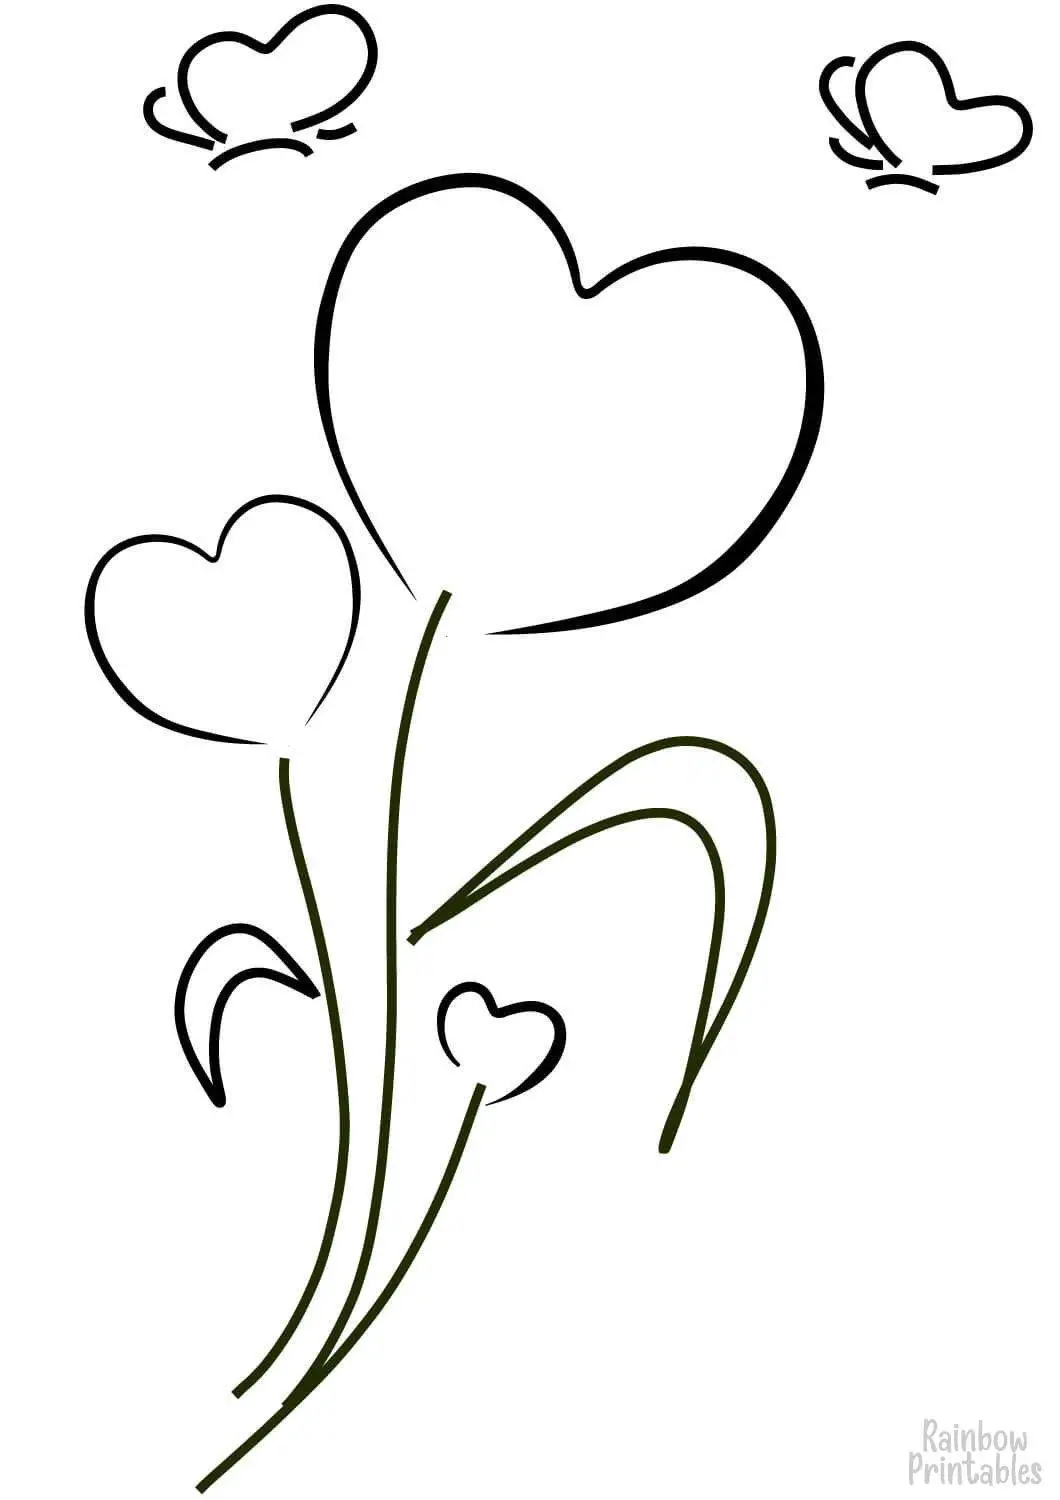 SIMPLE-EASY-line-drawings-HEARTS and FLOWERs Butterfly-coloring-page-for-kids Outline